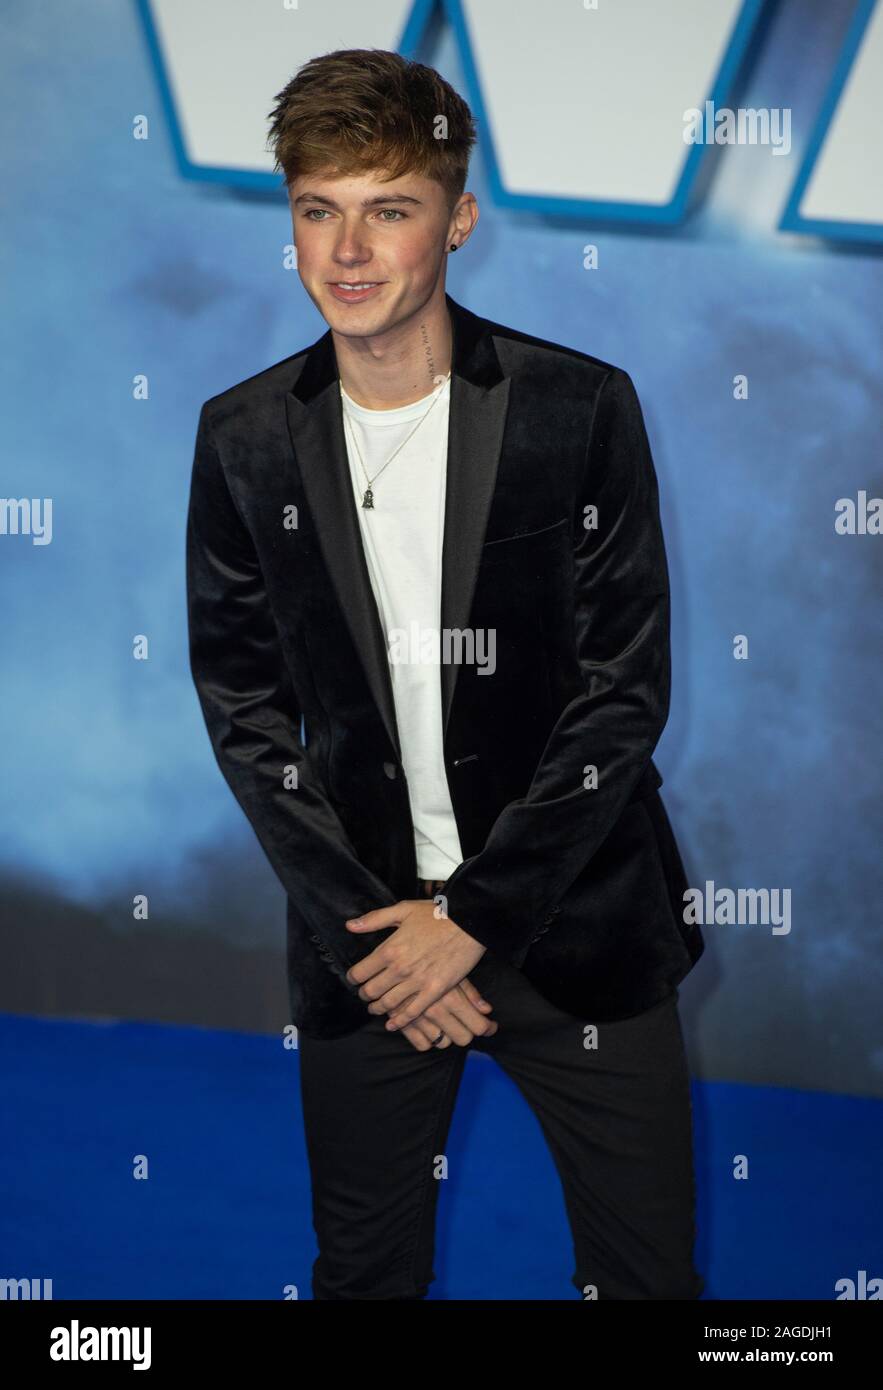 London, UK. 18th Dec, 2019. LONDON, ENGLAND - DECEMBER 18: HRVY attends the European Premiere of 'Star Wars: The Rise of Skywalker' at Cineworld Leicester Square on December 18, 2019 in London, England. Credit: Gary Mitchell, GMP Media/Alamy Live News Stock Photo